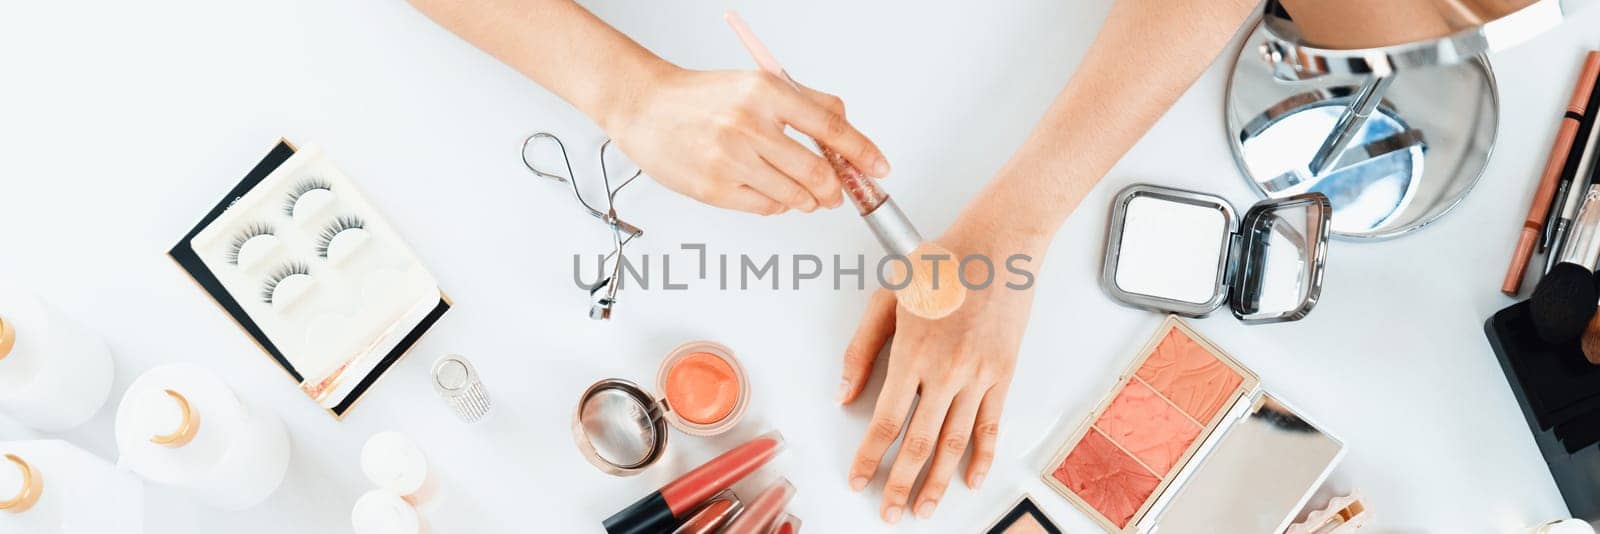 Close up top view image of beauty blogger or influencer shoot uttermost social media marketing or tutorial on online live streaming platform